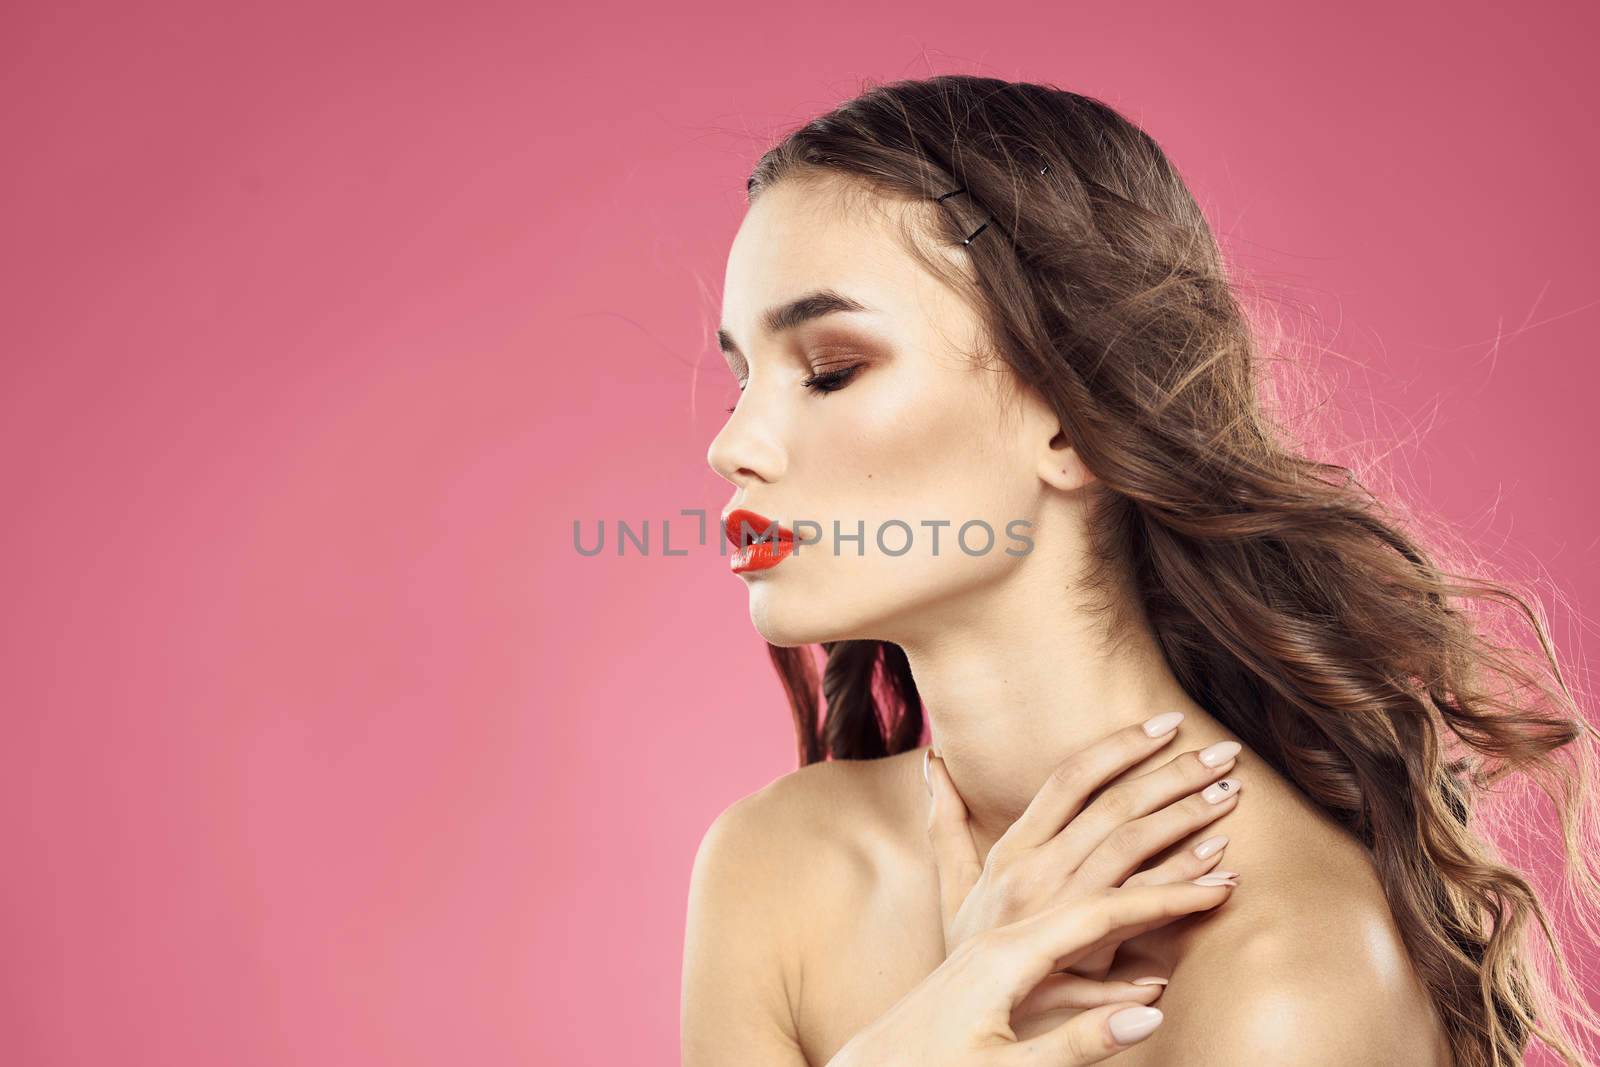 Beautiful woman with red lips on a pink background nude shoulders cropped view by SHOTPRIME